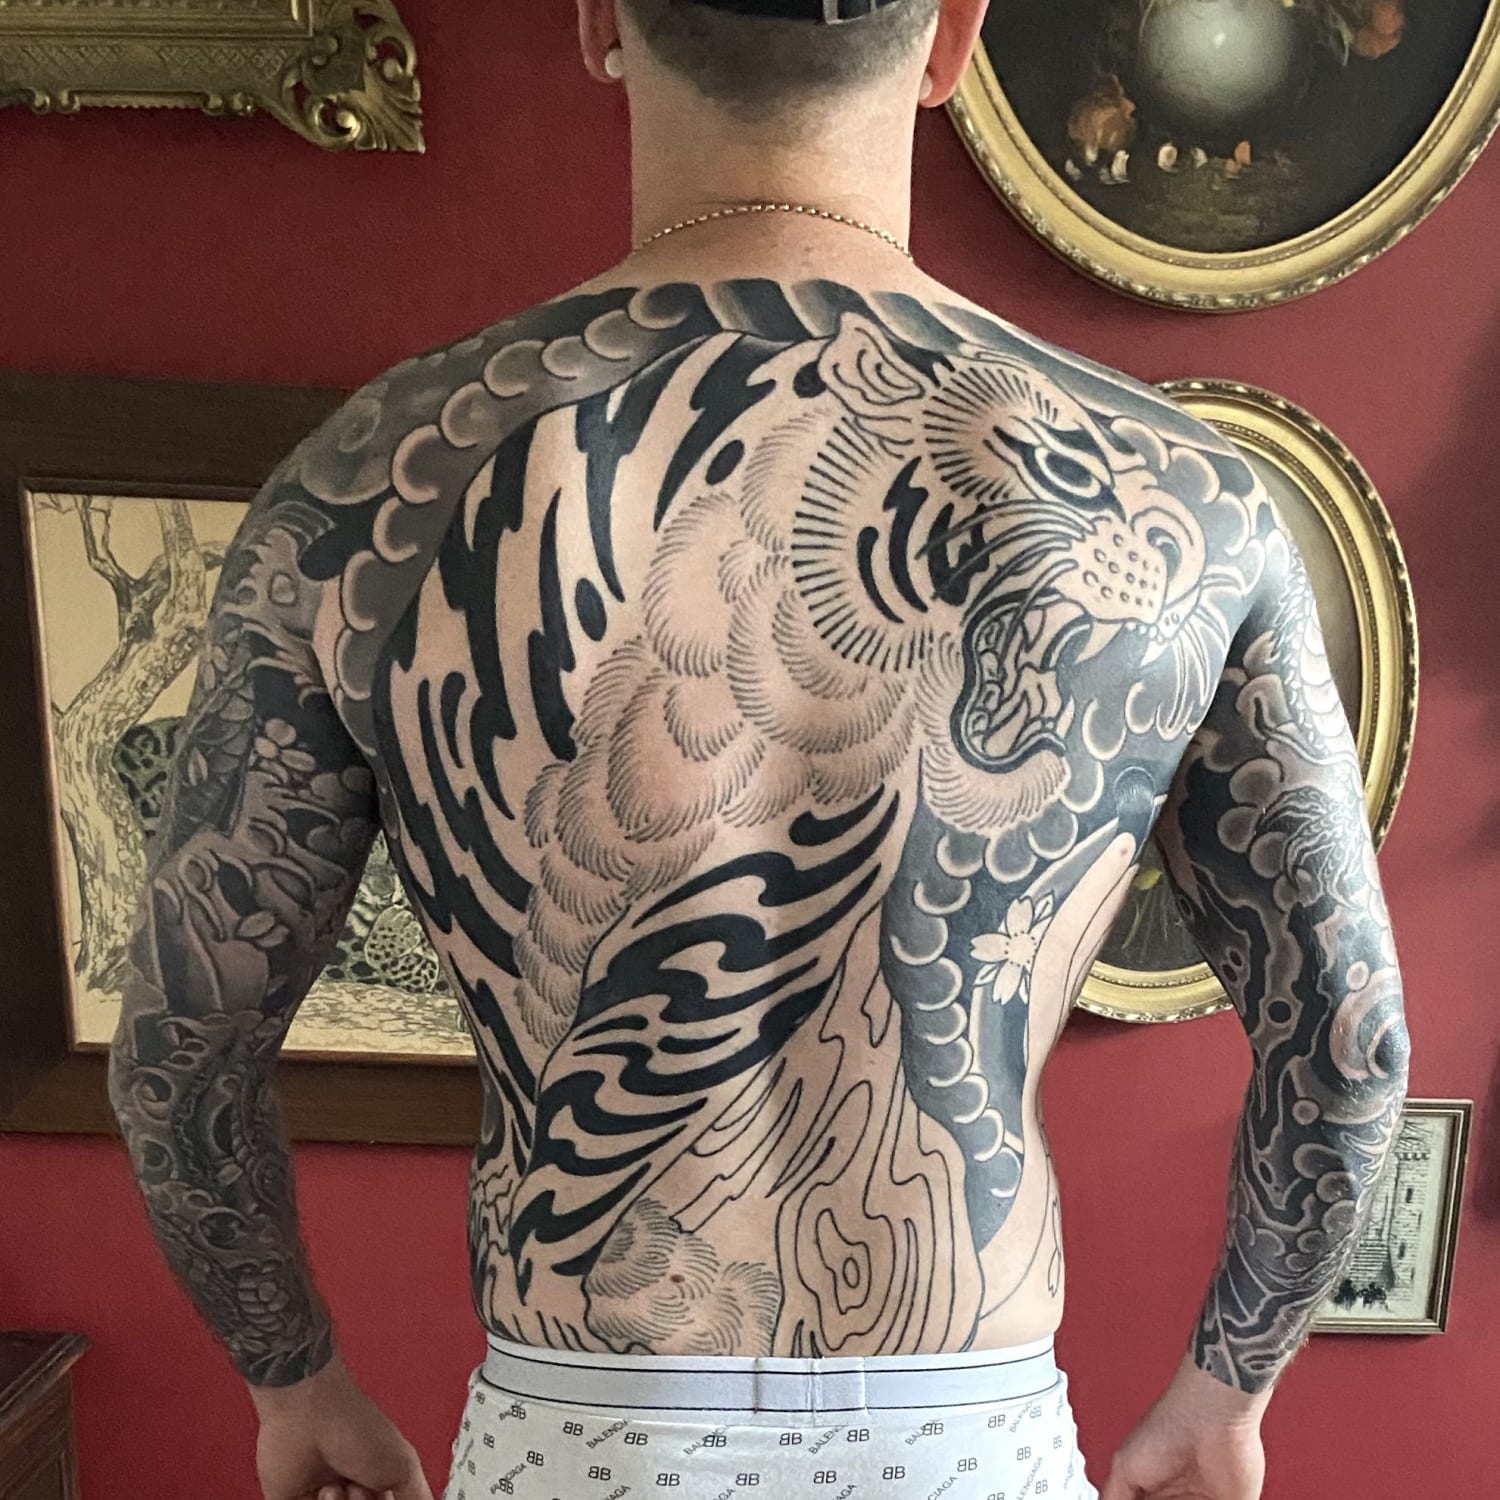 Tiger back piece in progress, part of a mainly Japanese inspired bodysuit. George Crewe, Noiseland tattoo, Leicester, UK.